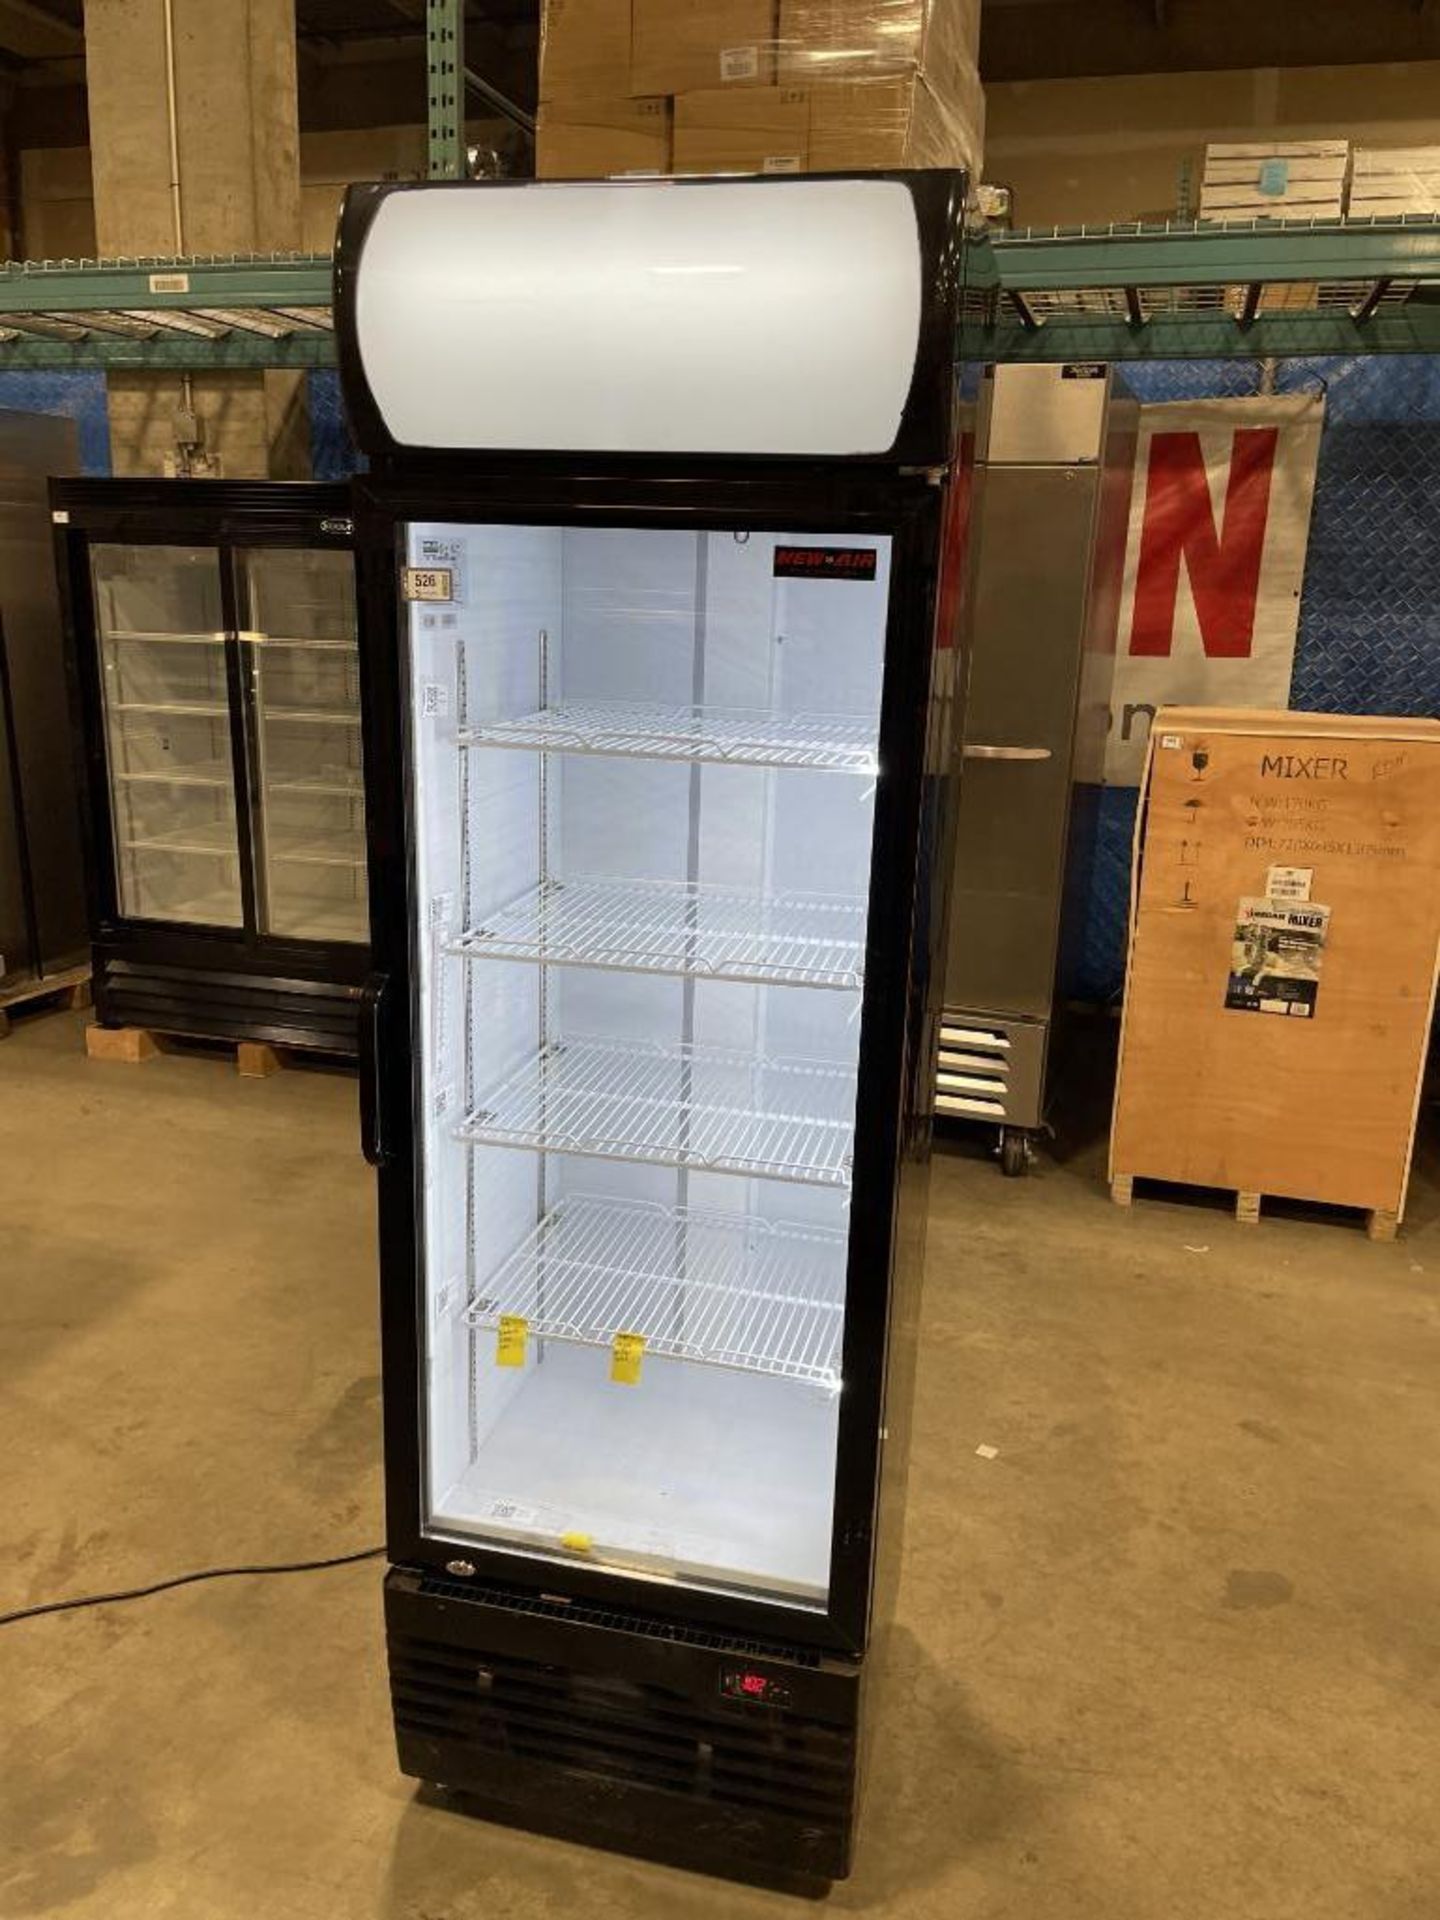 NEW-AIR NGR-036-H SINGLE GLASS DOOR DISPLAY COOLER - Image 2 of 12